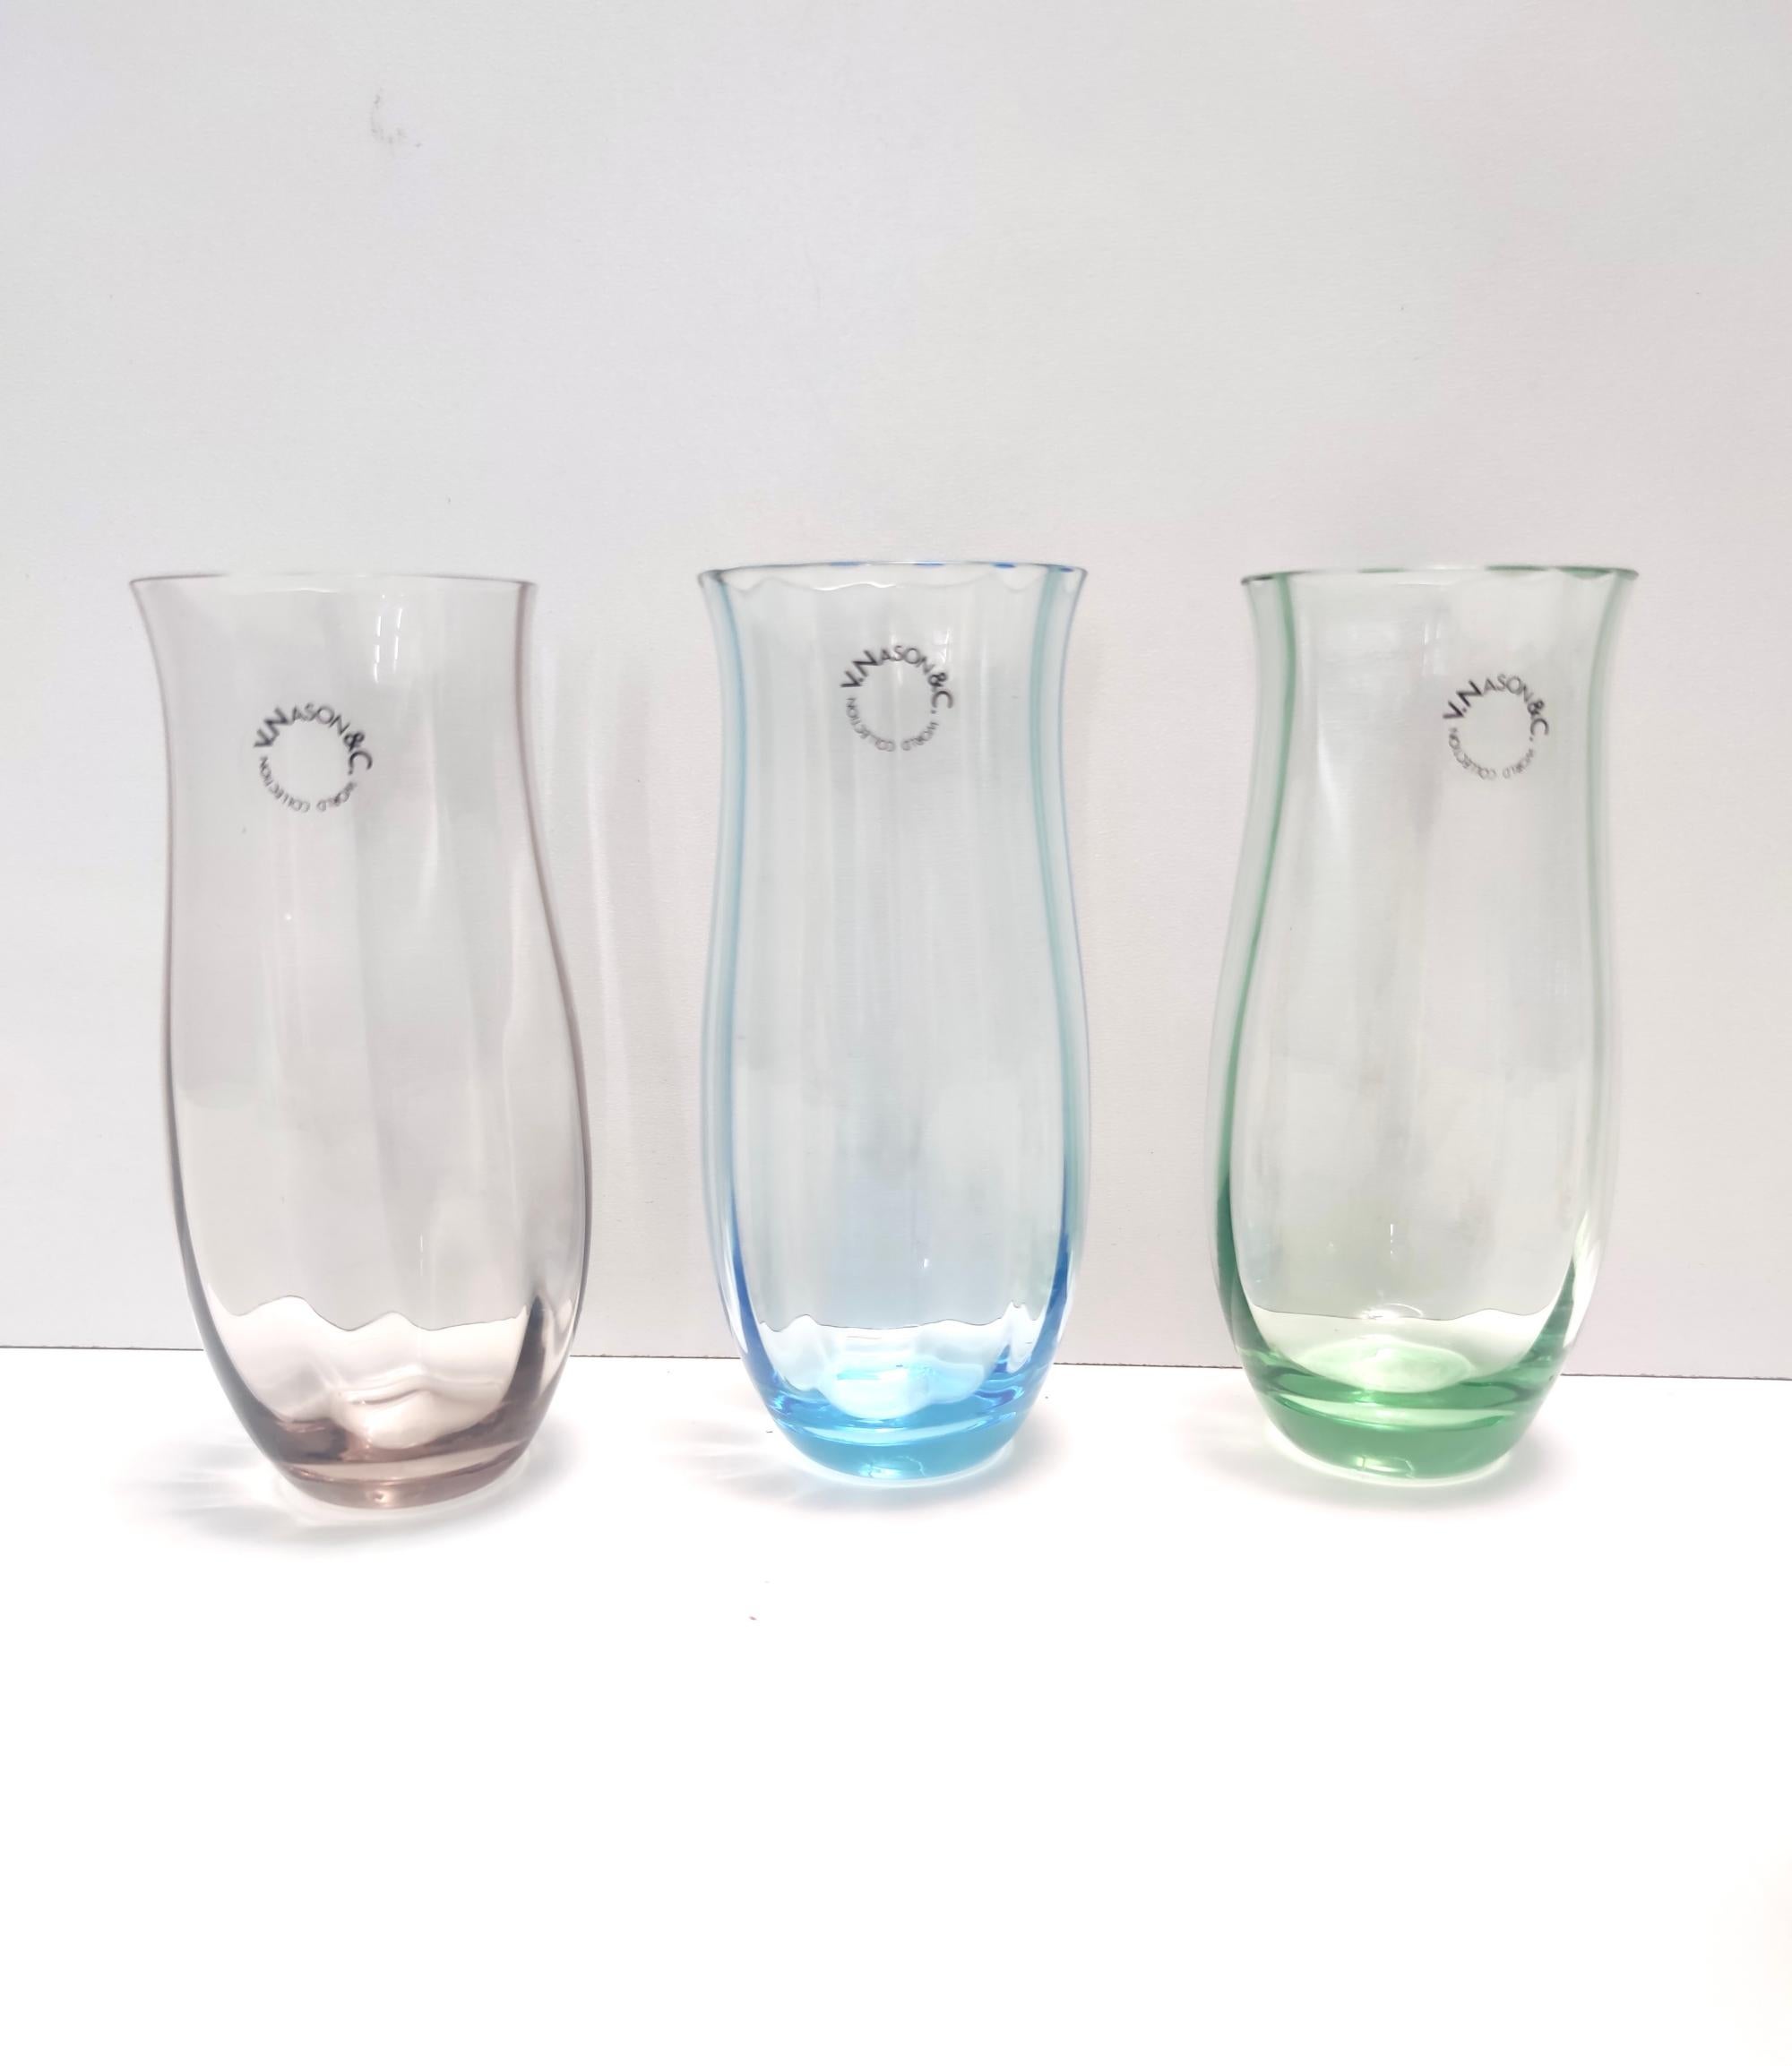 Made in Italy, 1990s.
This set of six glasses is made in Murano glass, which internally are ribbed and externally are smooth.
It is a vintage set, therefore it might show slight traces of use, but it can be considered as in excellent original